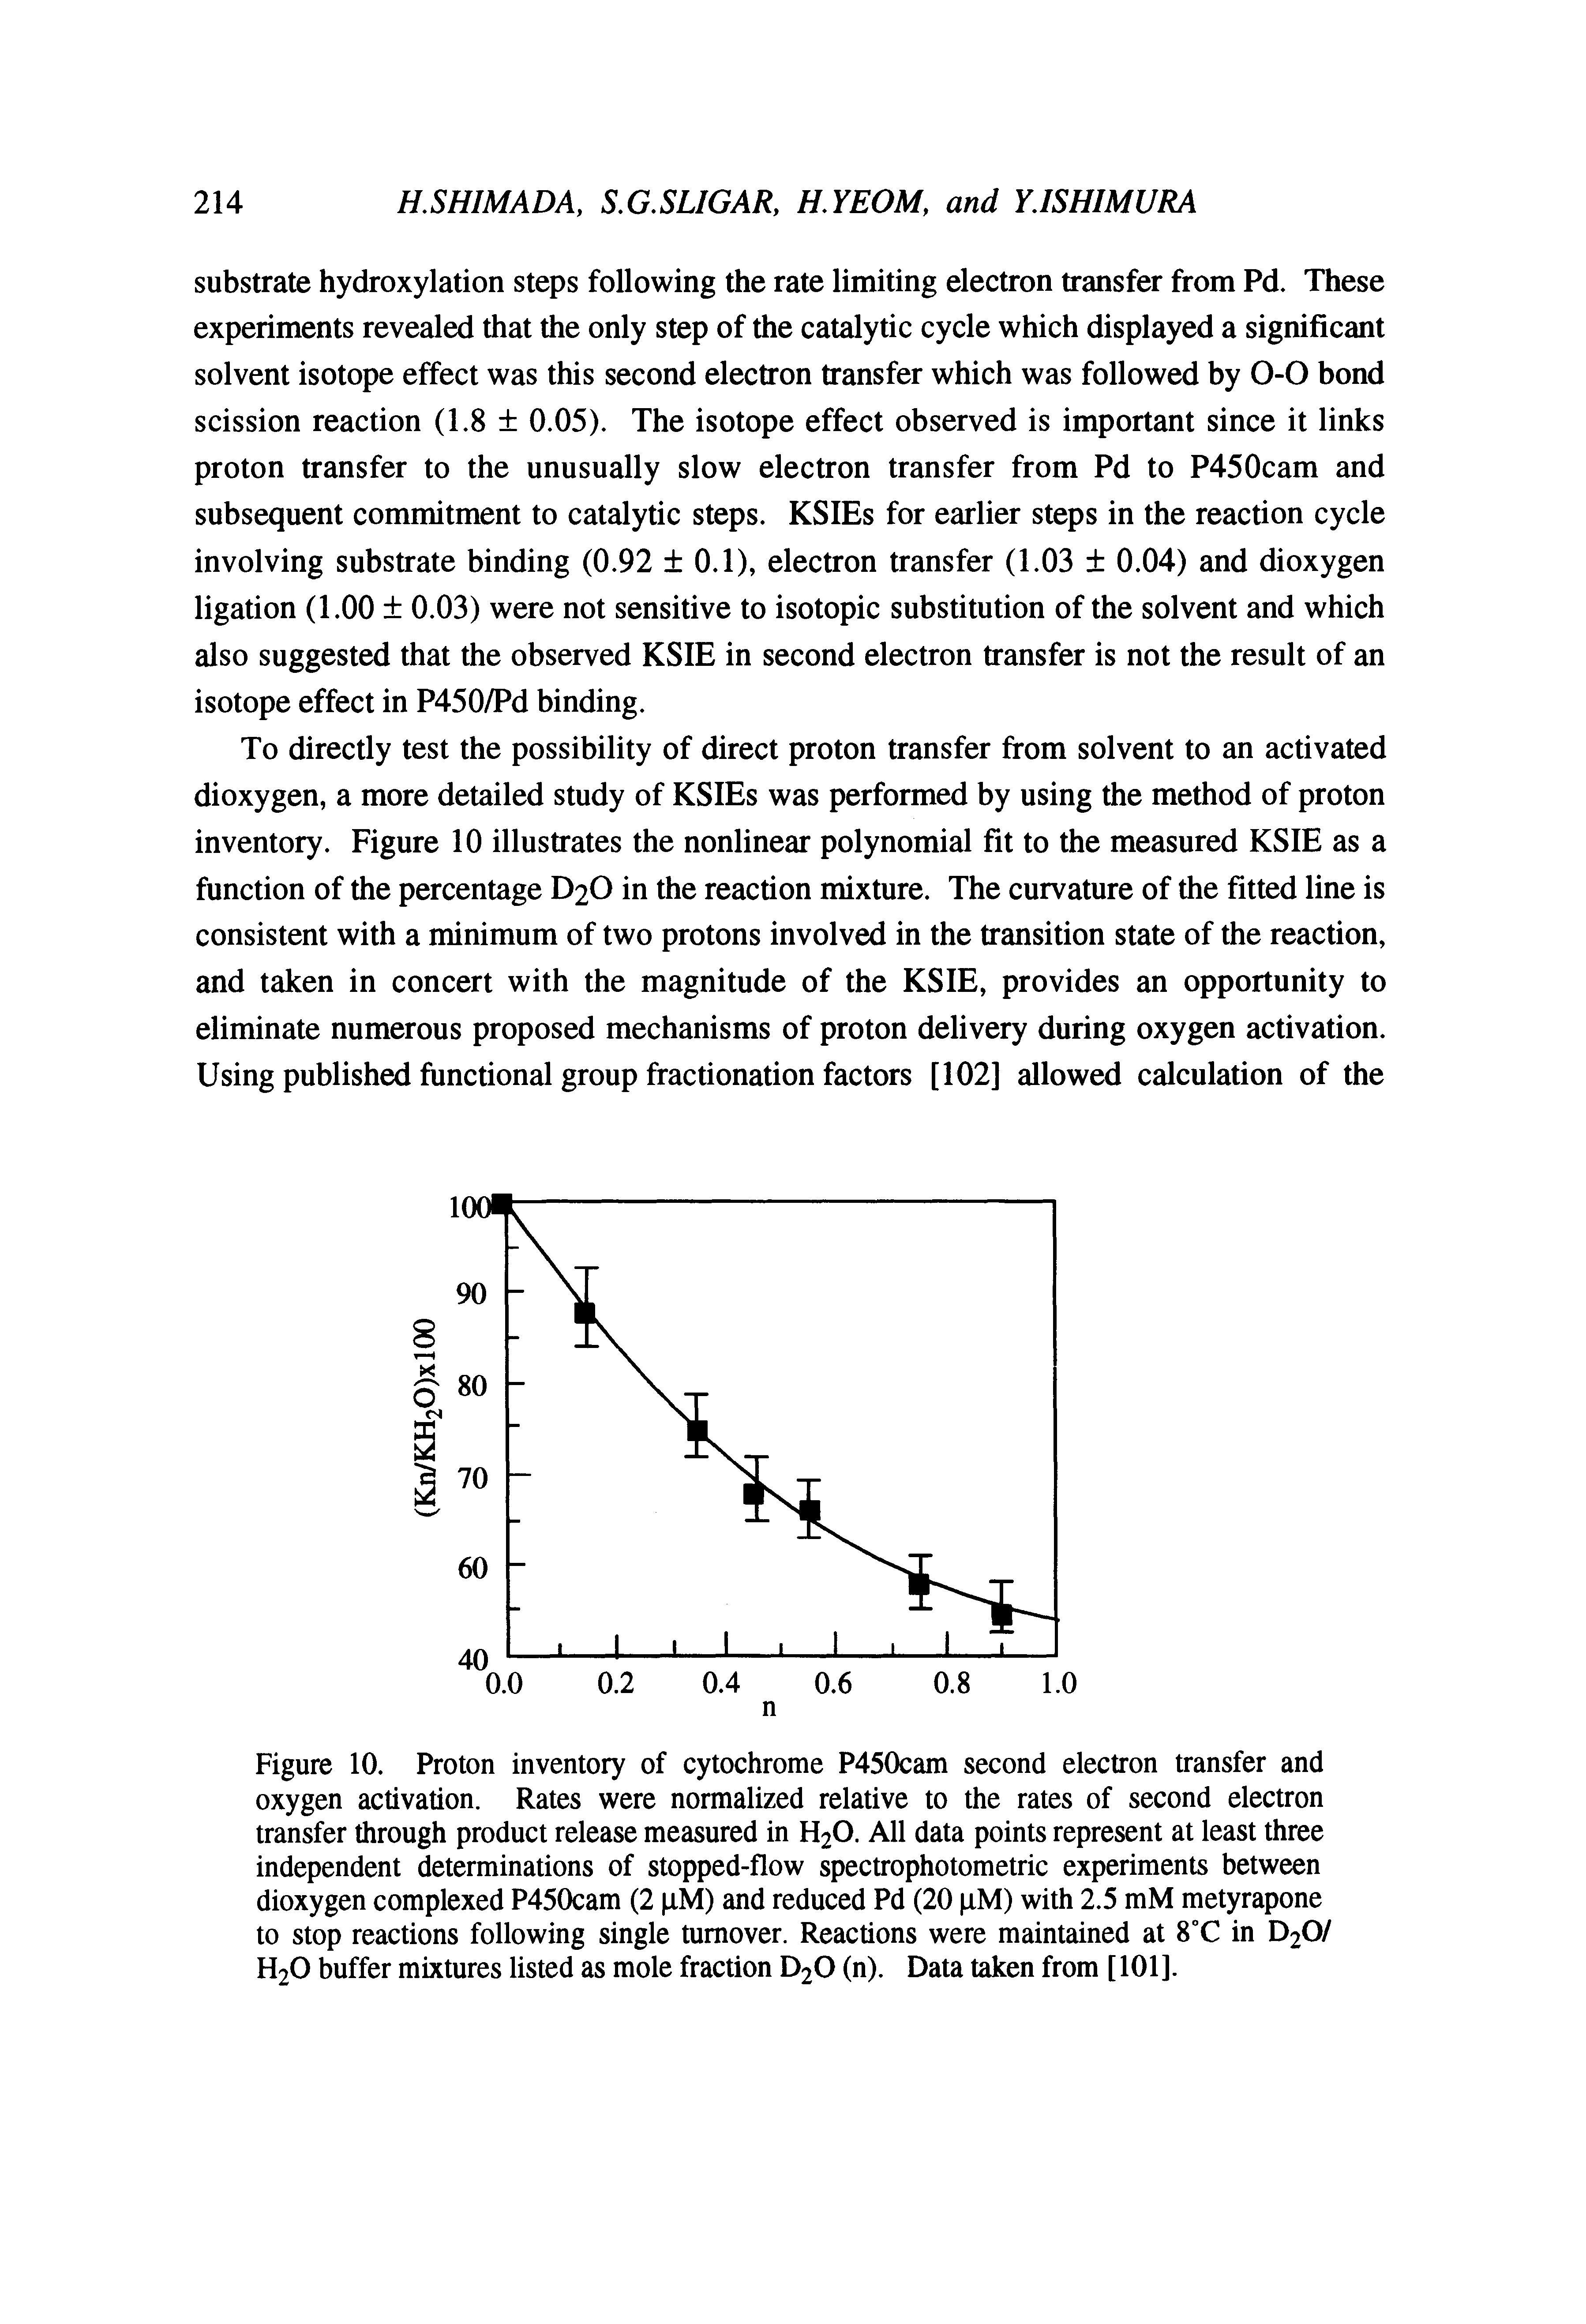 Figure 10. Proton inventory of cytochrome P450cam second electron transfer and oxygen activation. Rates were normalized relative to the rates of second electron transfer through product release measured in H2O. All data points represent at least three independent determinations of stopped-flow spectrophotometric experiments between dioxygen complexed P450cam (2 iM) and reduced Pd (20 pM) with 2.5 mM metyrapone to stop reactions following single turnover. Reactions were maintained at 8T in D2O/ H2O buffer mixtures listed as mole fraction D2O (n). Data taken from [101].